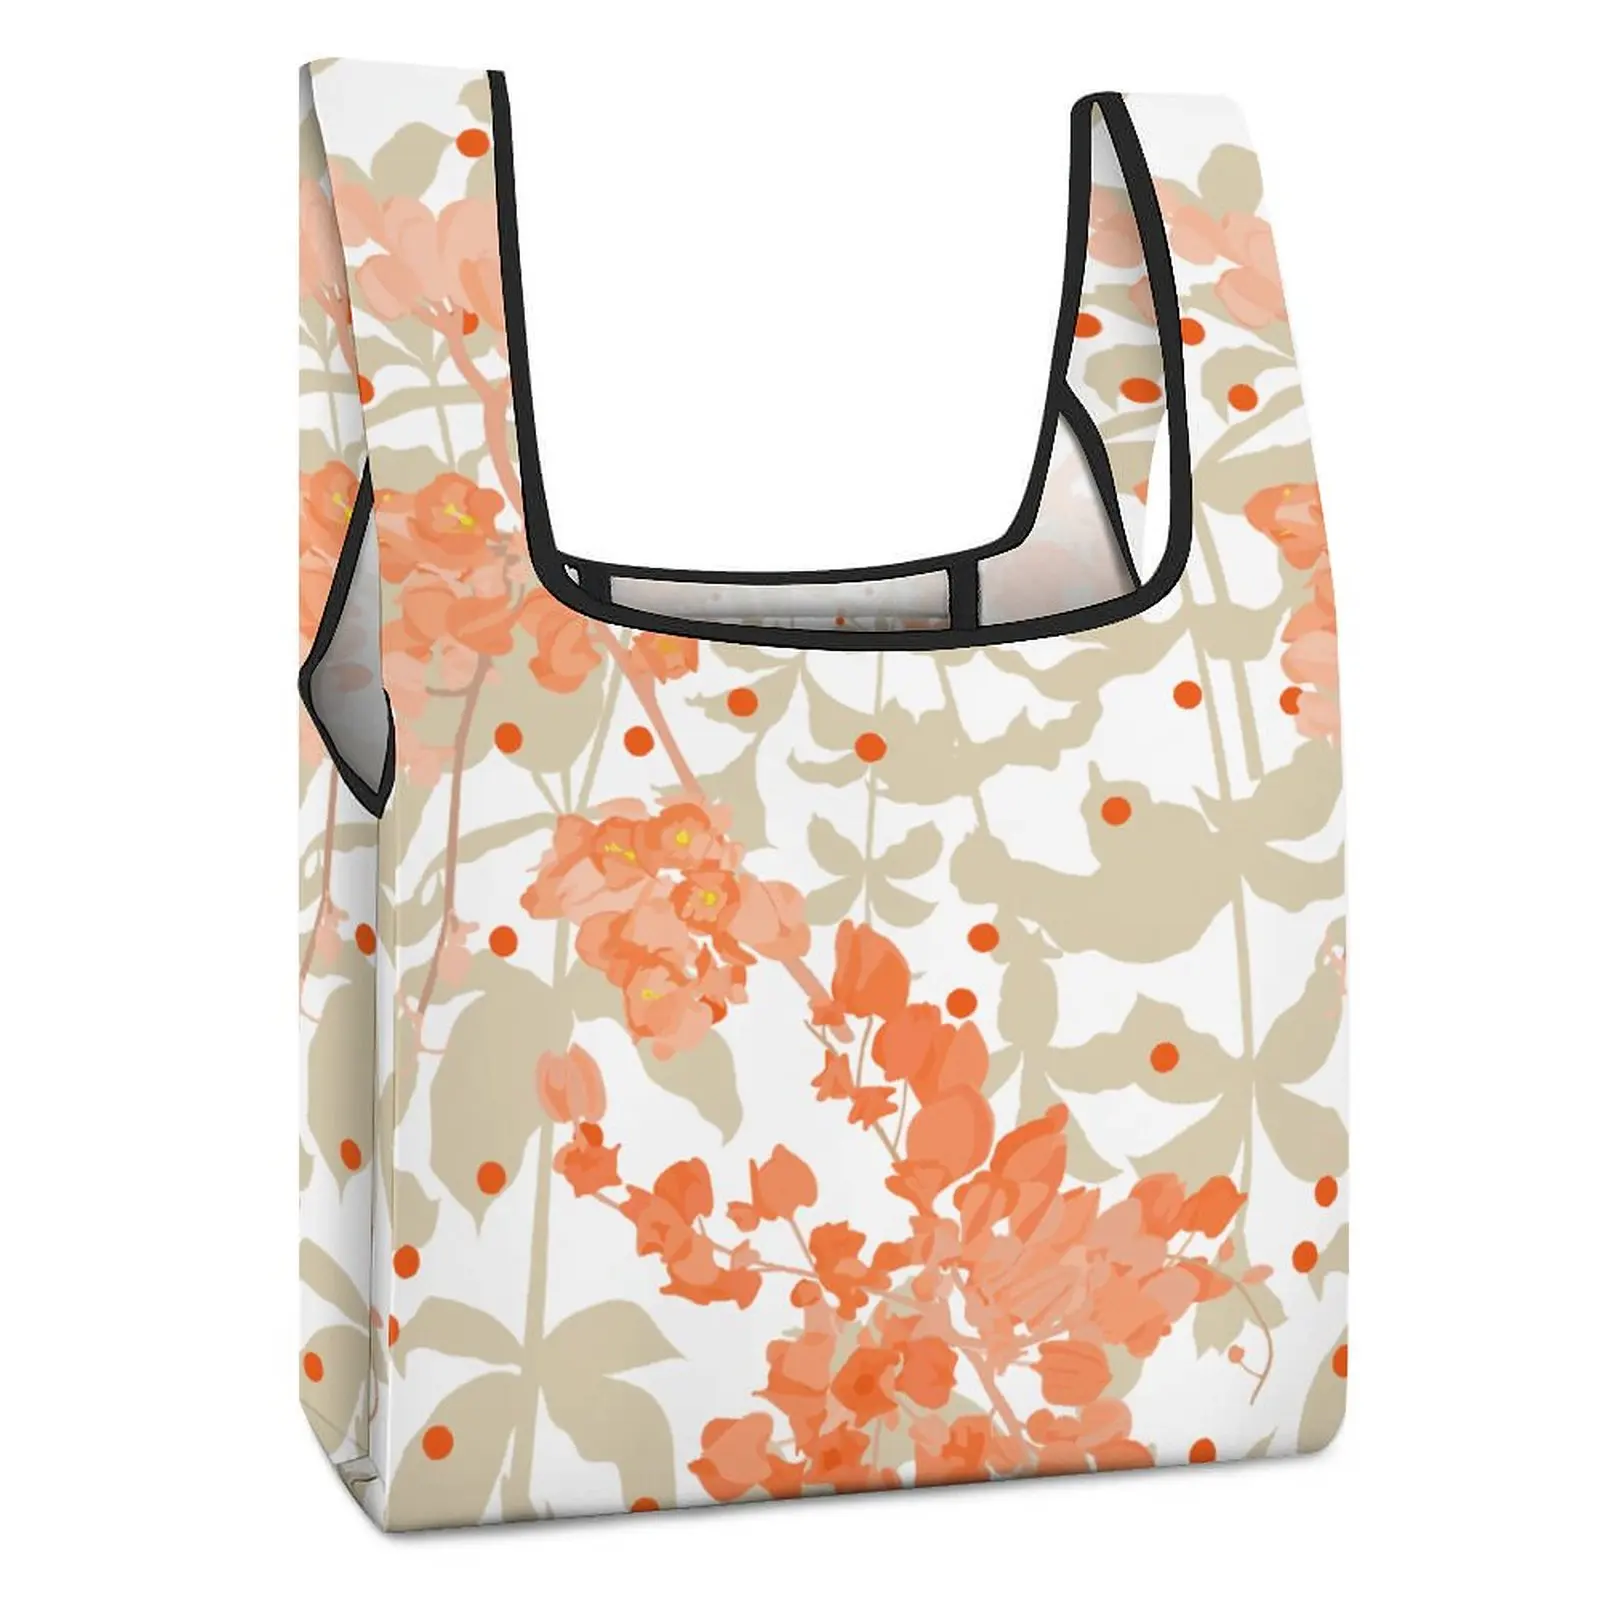 Custom Pattern Color Printing Foldable Shopping Bag Food Reusable Travel Grocery Handbags Collapsible Vegetable Organizer Pack